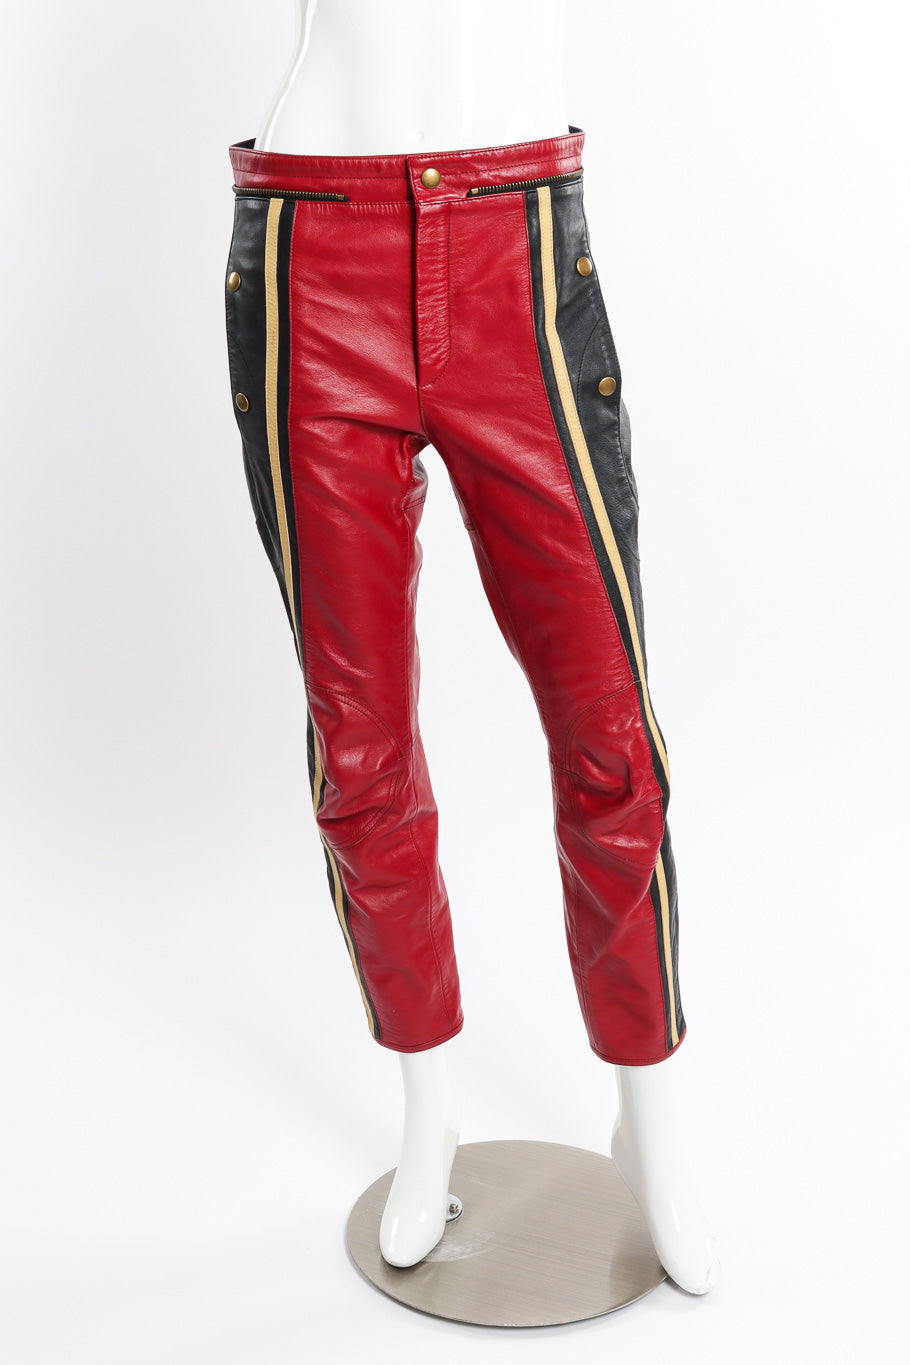 2016 F/W Leather Moto Pant by Chloe on mannequin @recessla